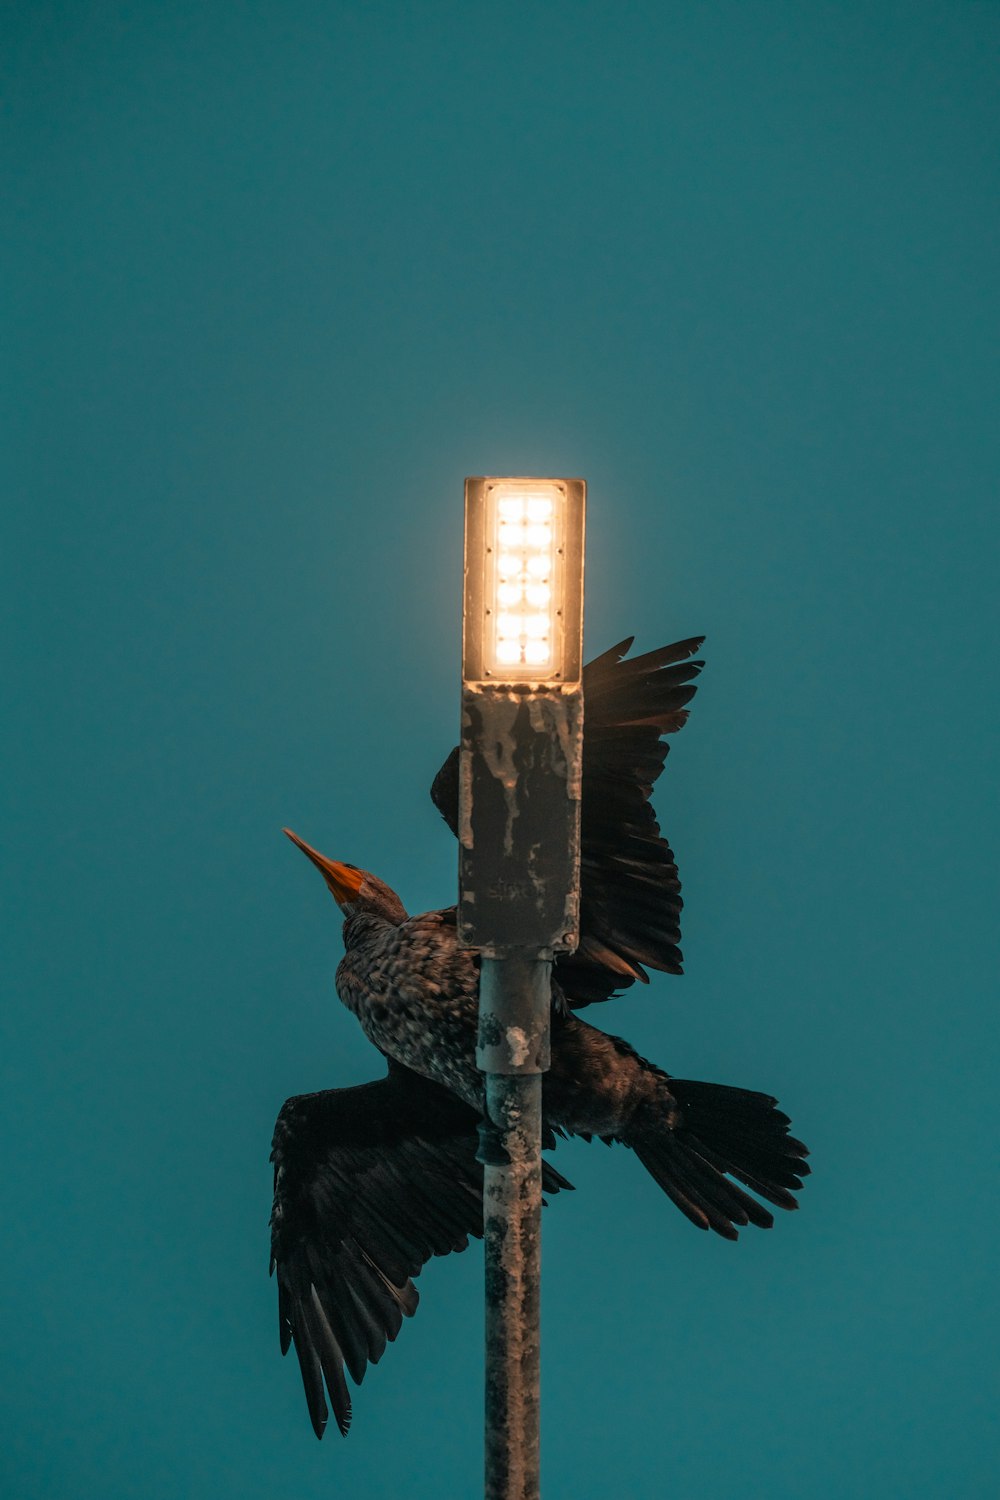 a bird that is sitting on top of a street light